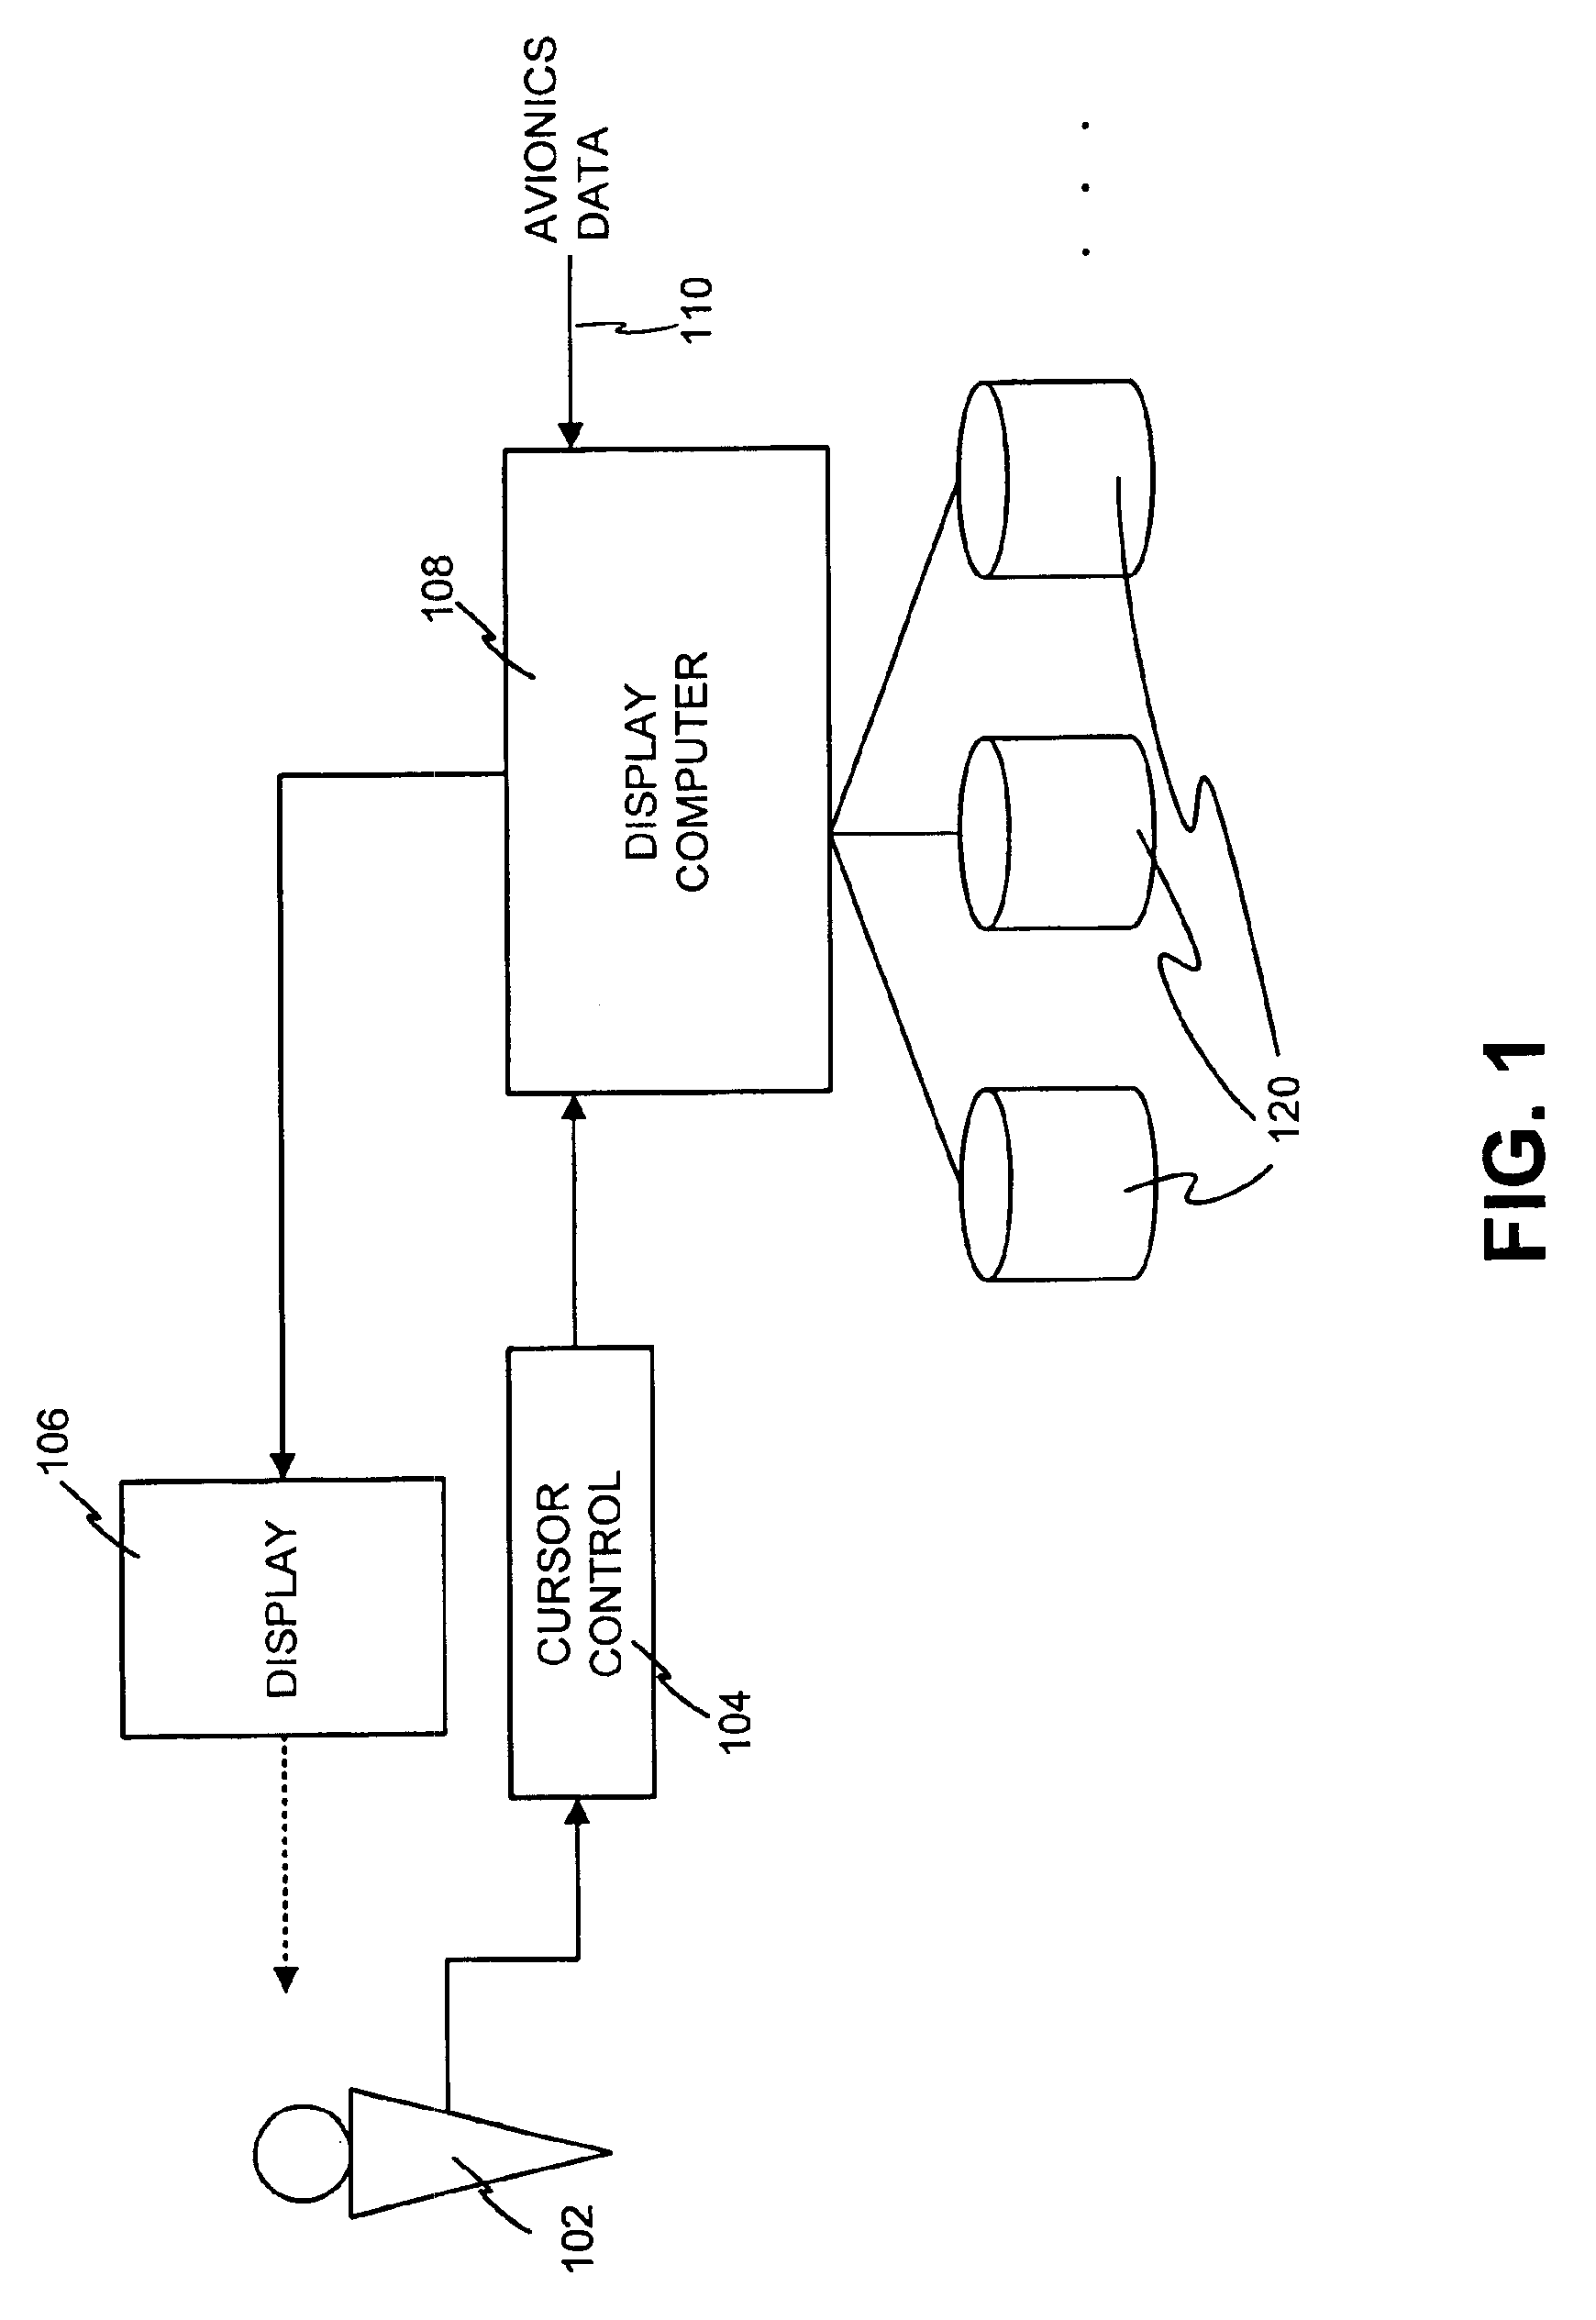 Methods and apparatus for real-time projection and rendering of geospatially organized data